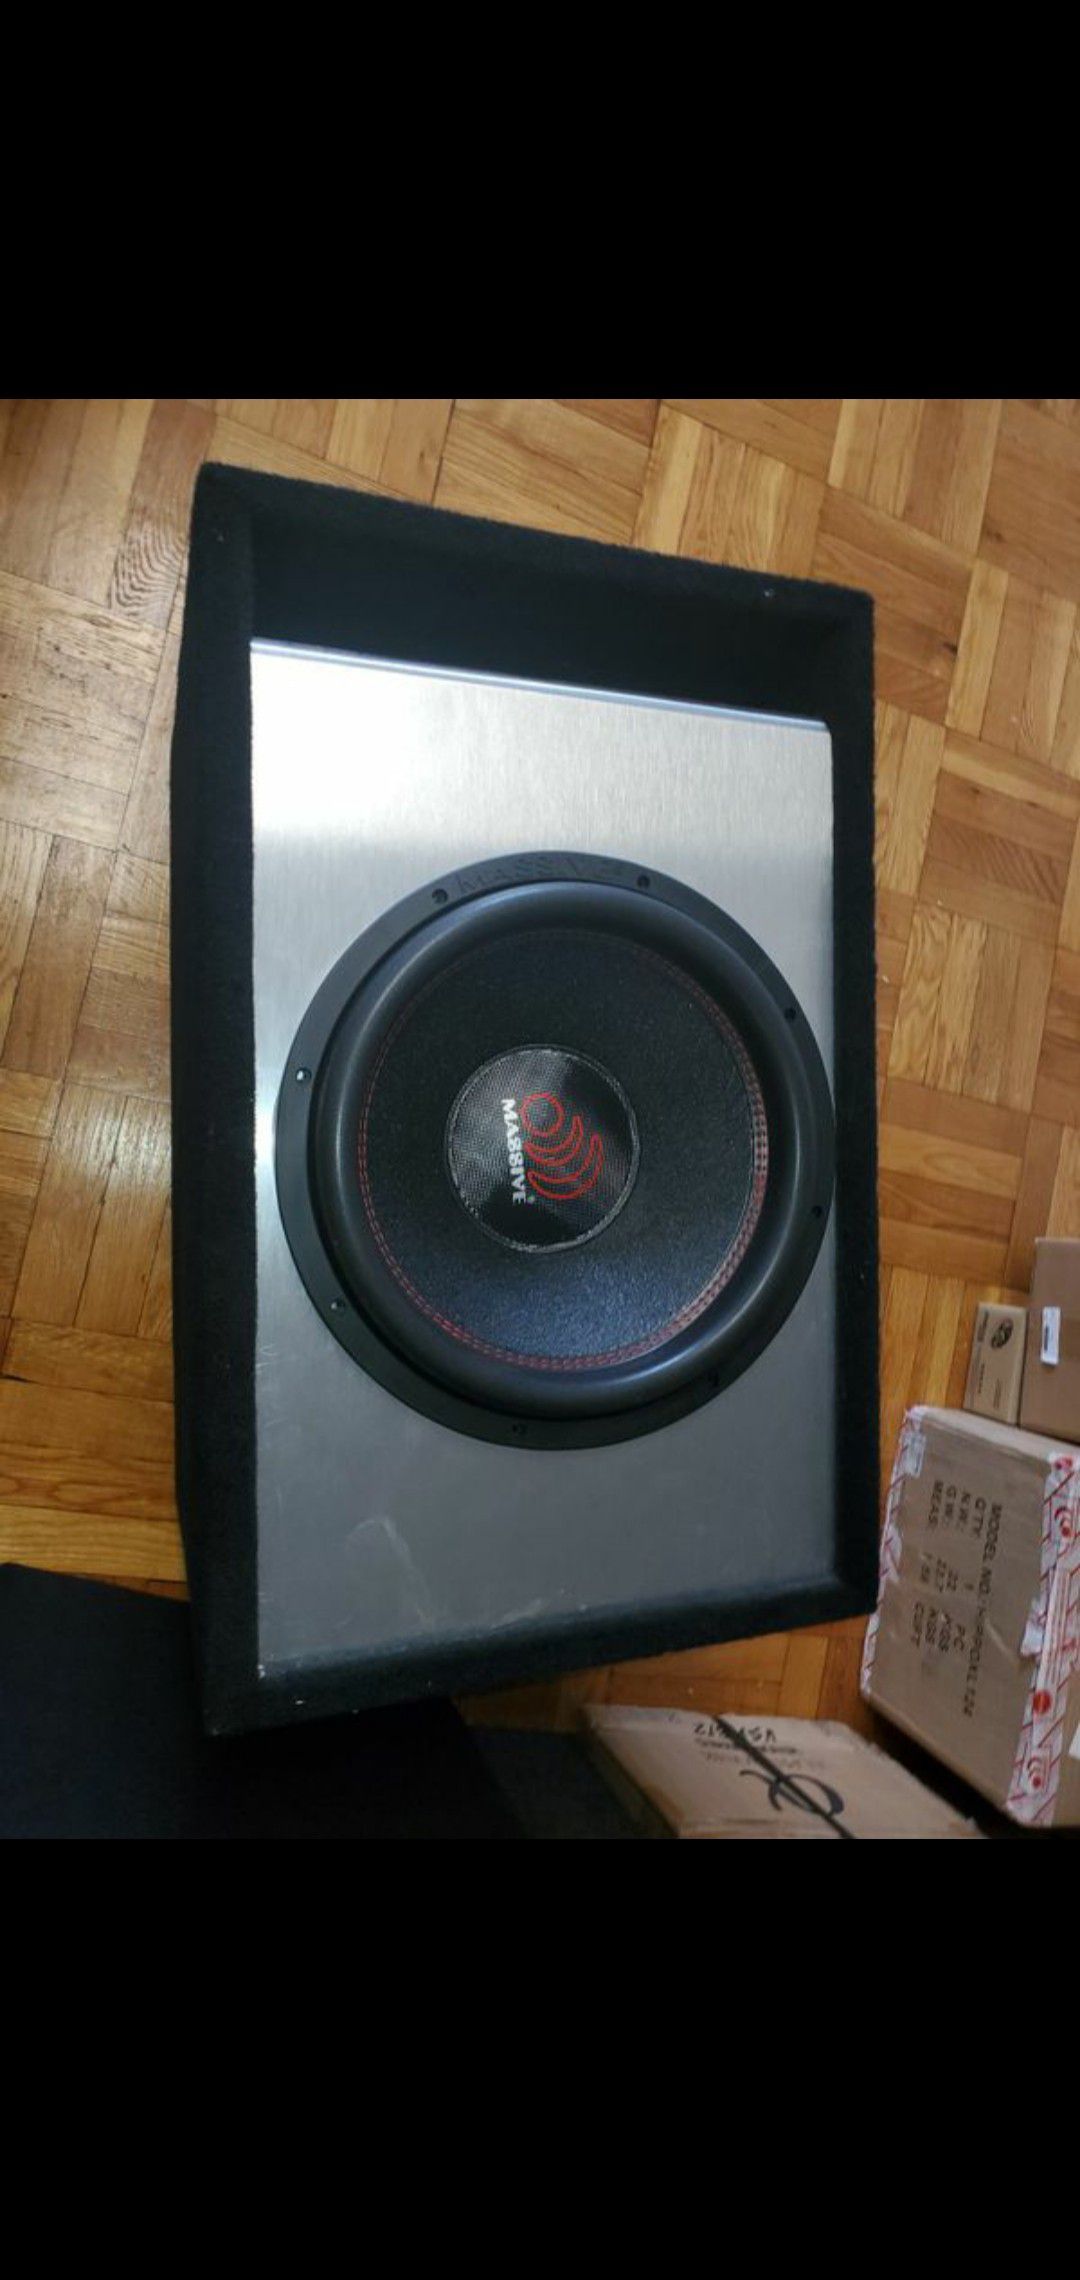 15INCH MASSIVE AUDIO HIPPO XL 4000WATTS DUAL 2OHM WIRED TO 1OHM LOAD IN PERFECT SPECS SUBWOOFER BOX